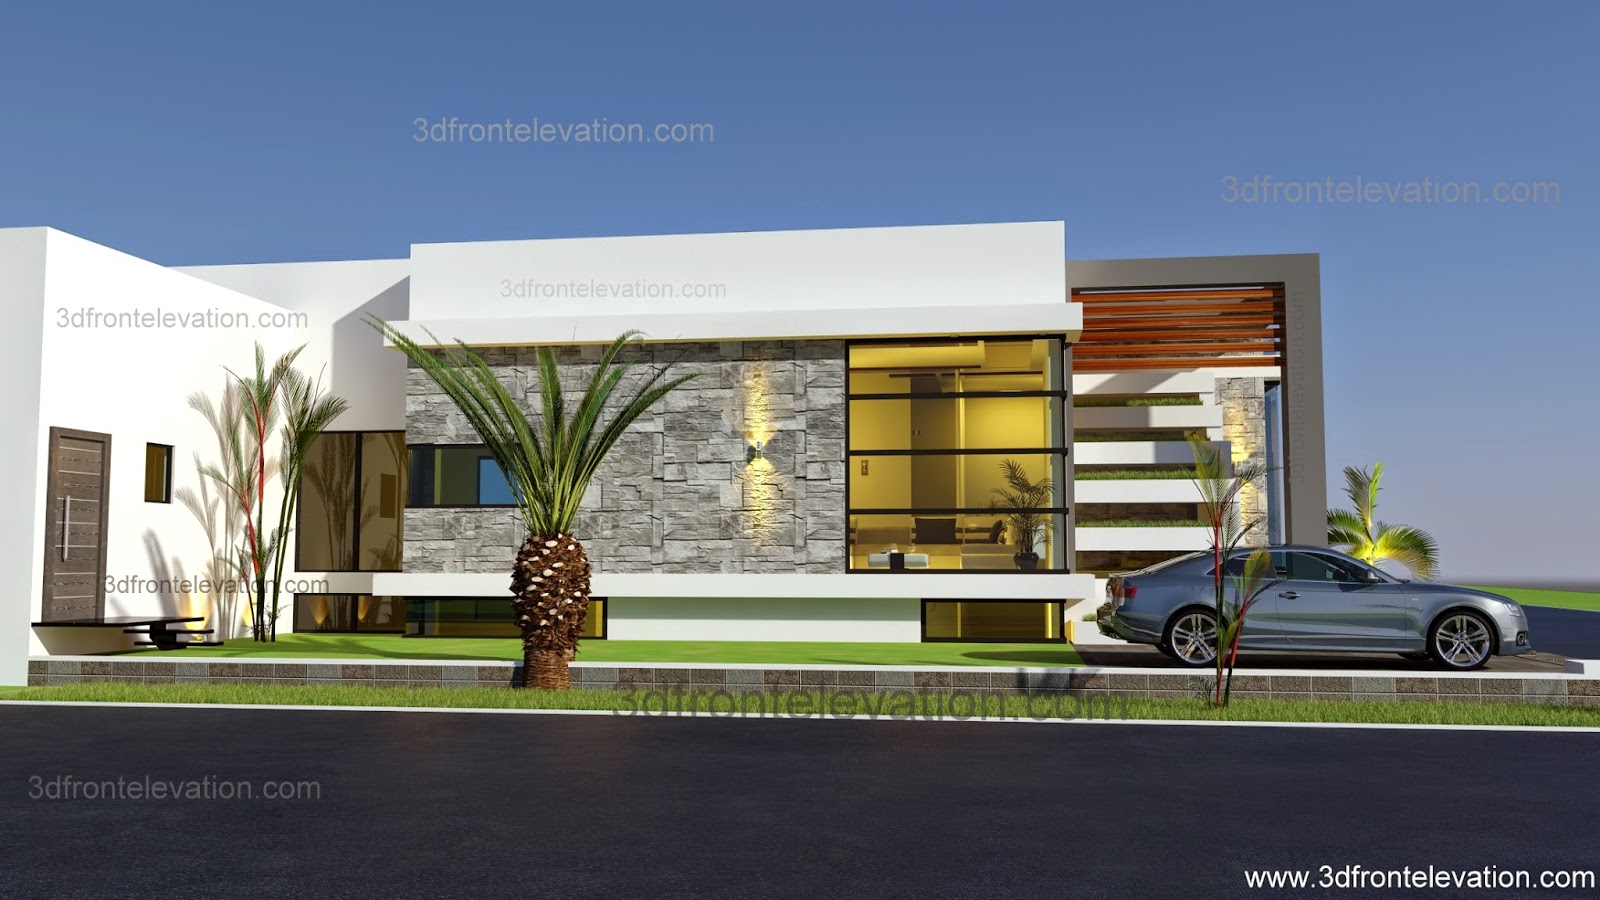 3D Front Elevation.com: Afghanistan House design 2015 ANOMINA Society